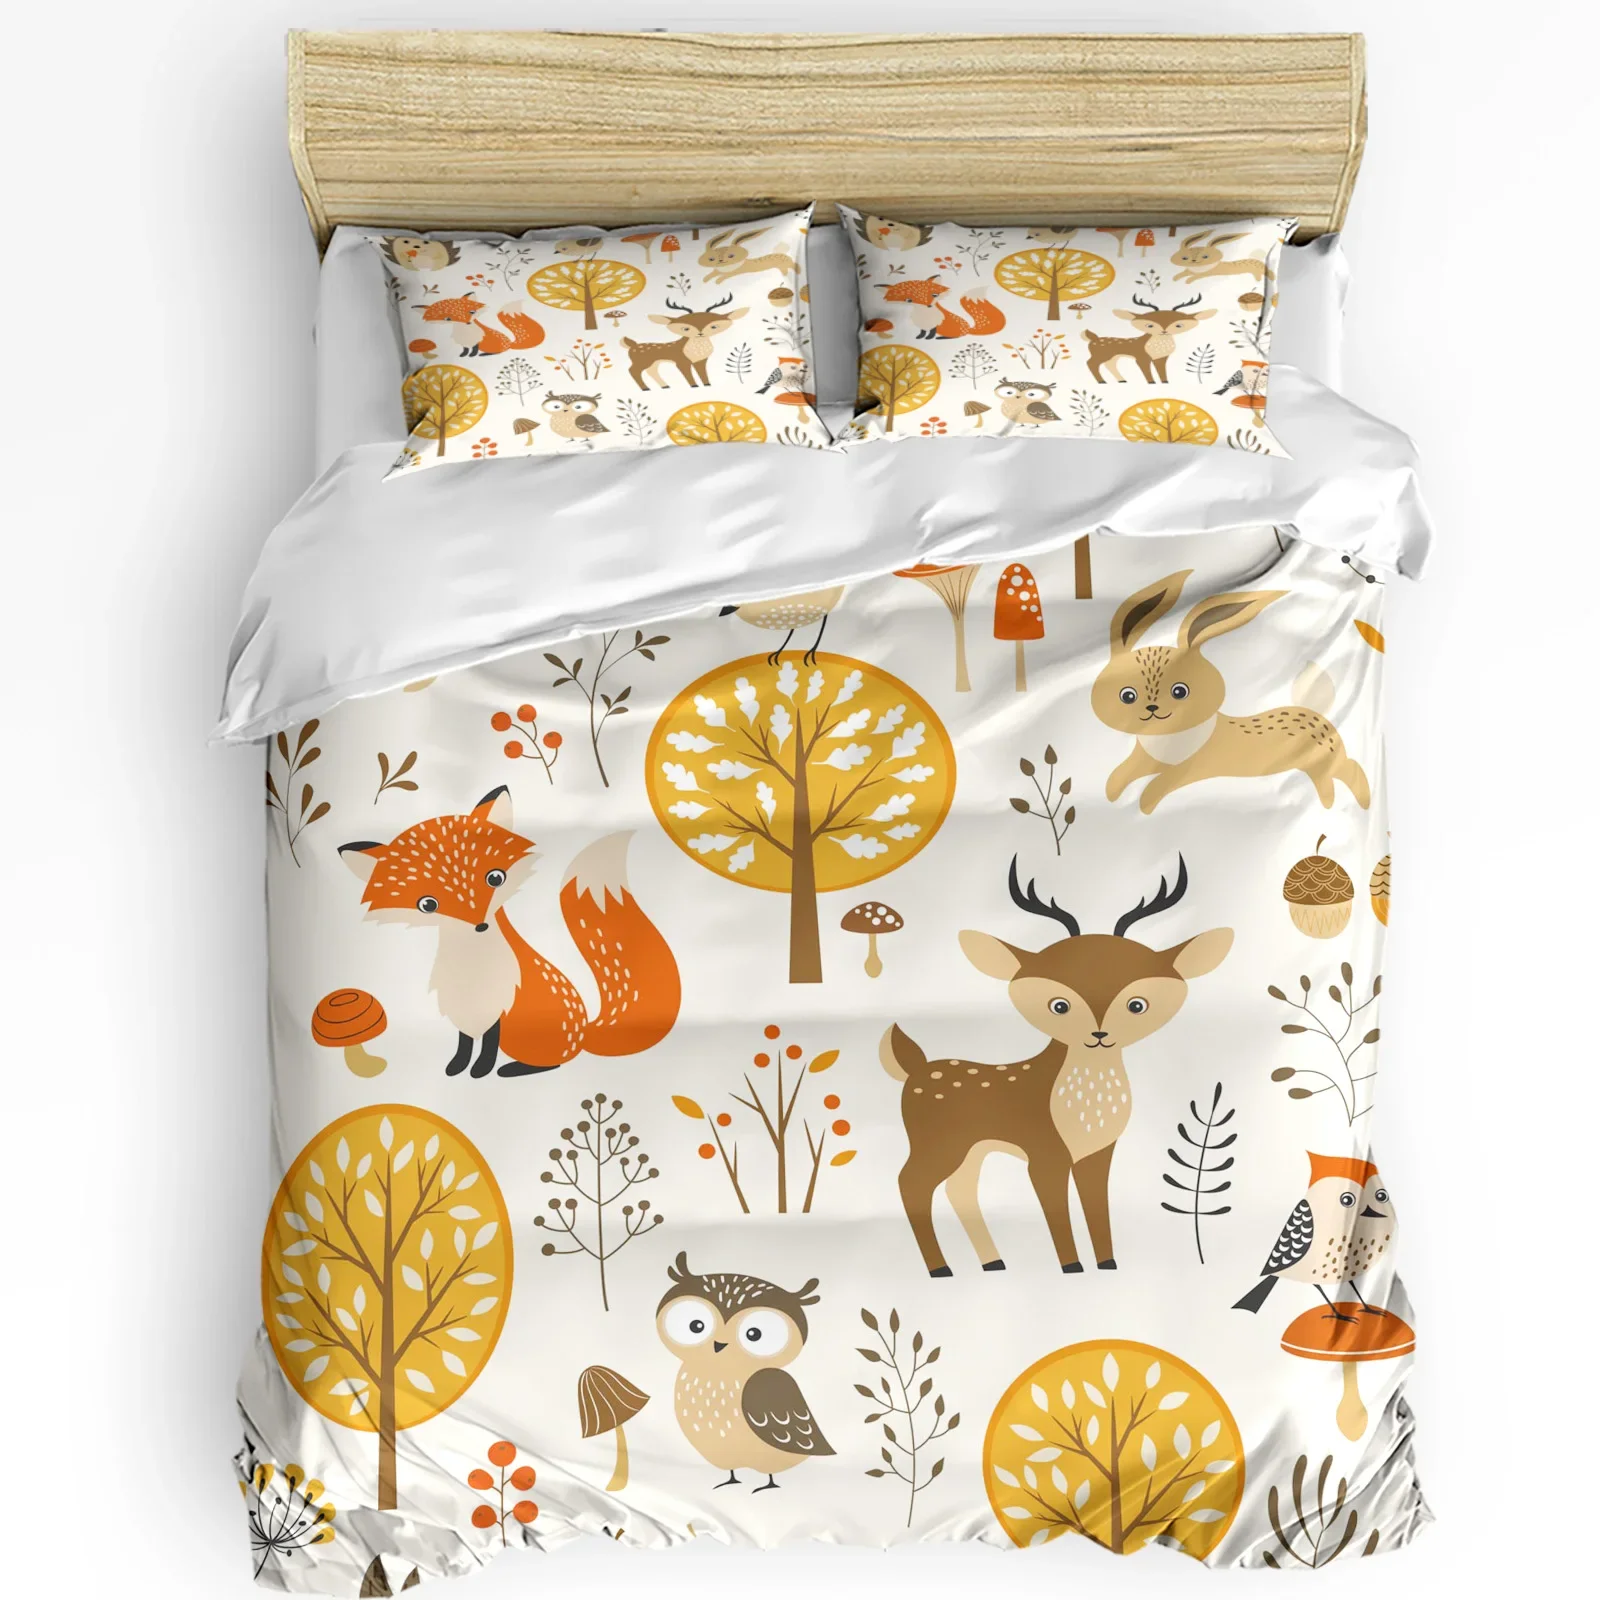 forest-animal-woods-owl-fox-deer-3pcs-bedding-set-for-bedroom-double-bed-home-textile-duvet-cover-quilt-cover-pillowcase